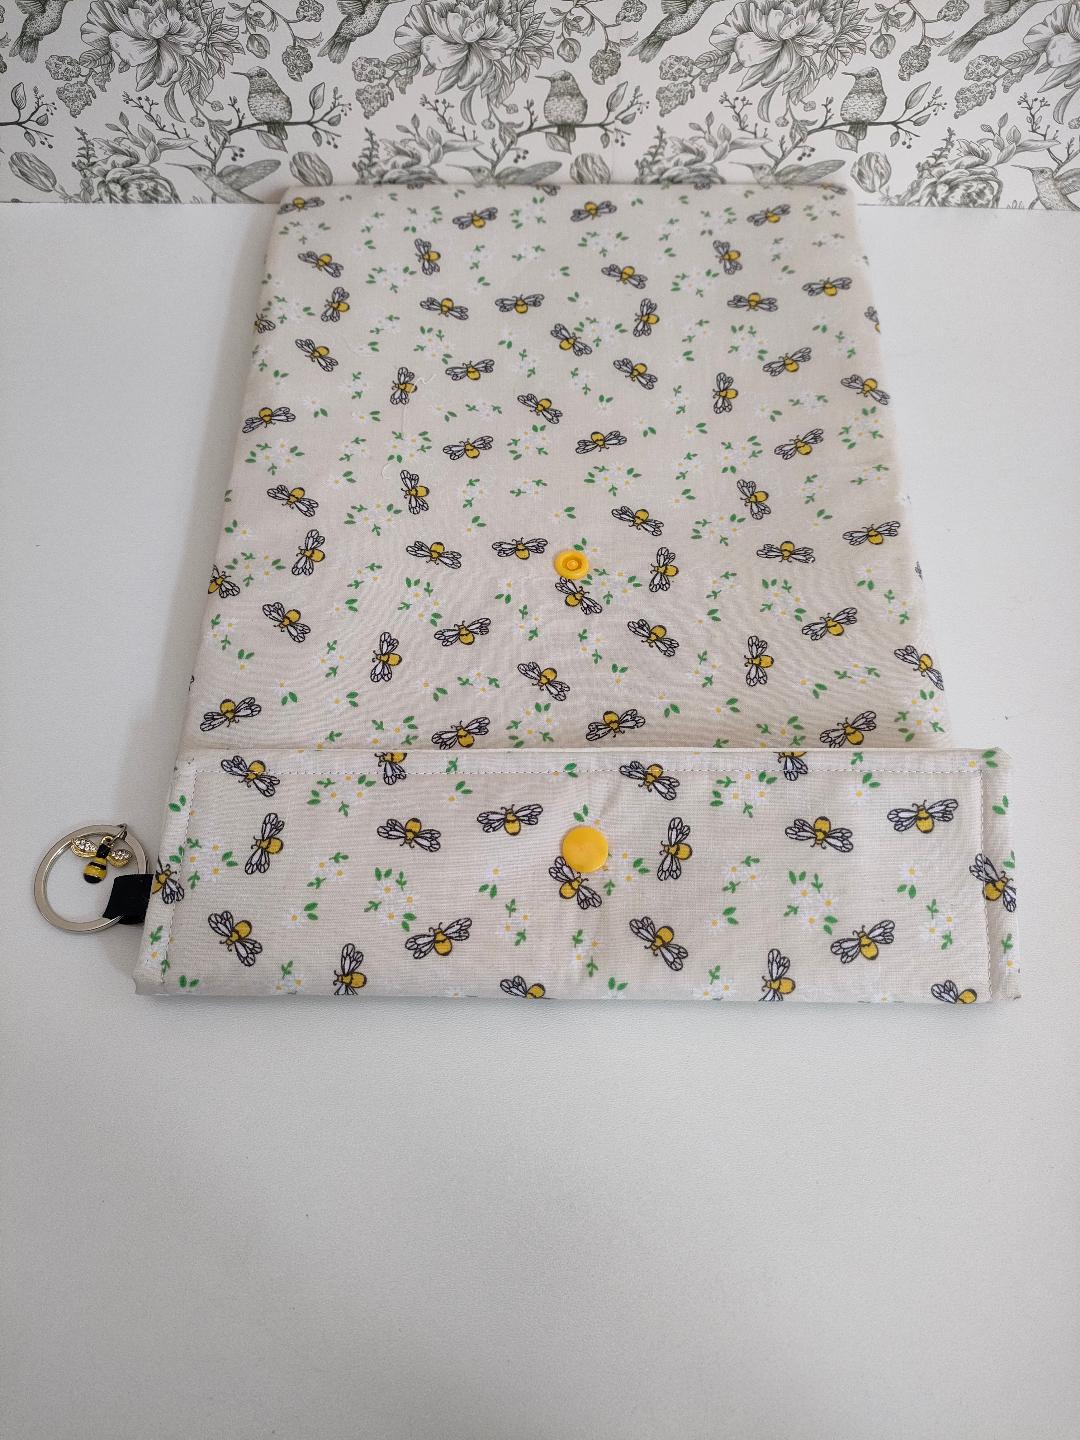 Adjustable Book Sleeve, Handmade Padded Protective Book Cosy, Yellow Bee Print Fabric Tablet Pouch, Holiday Book Essentials, Cute Bee Gifts